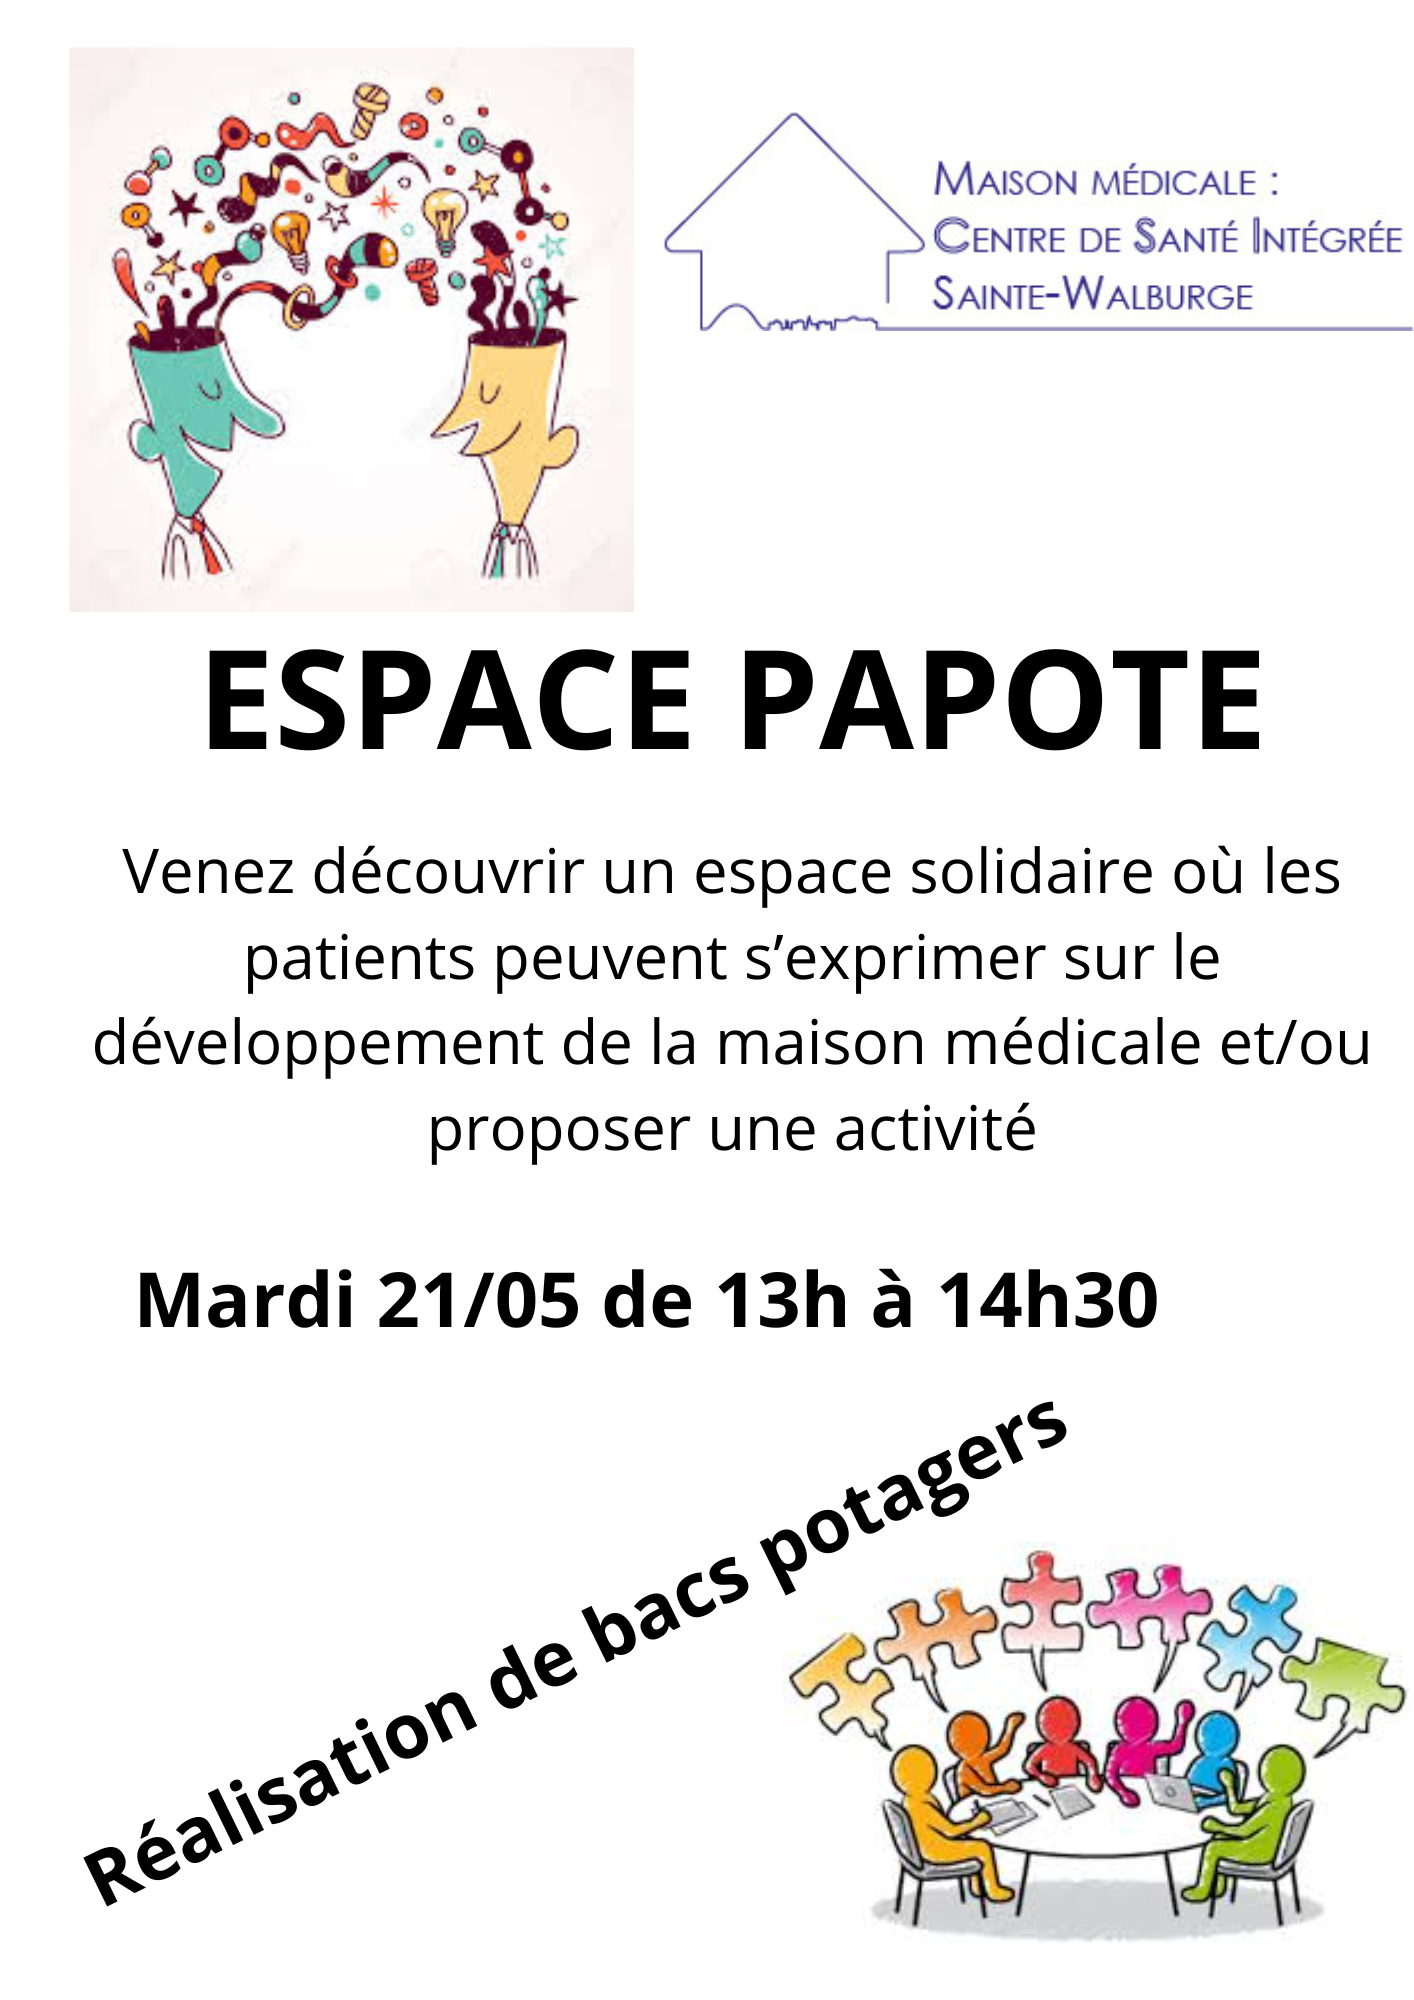 Espace papote